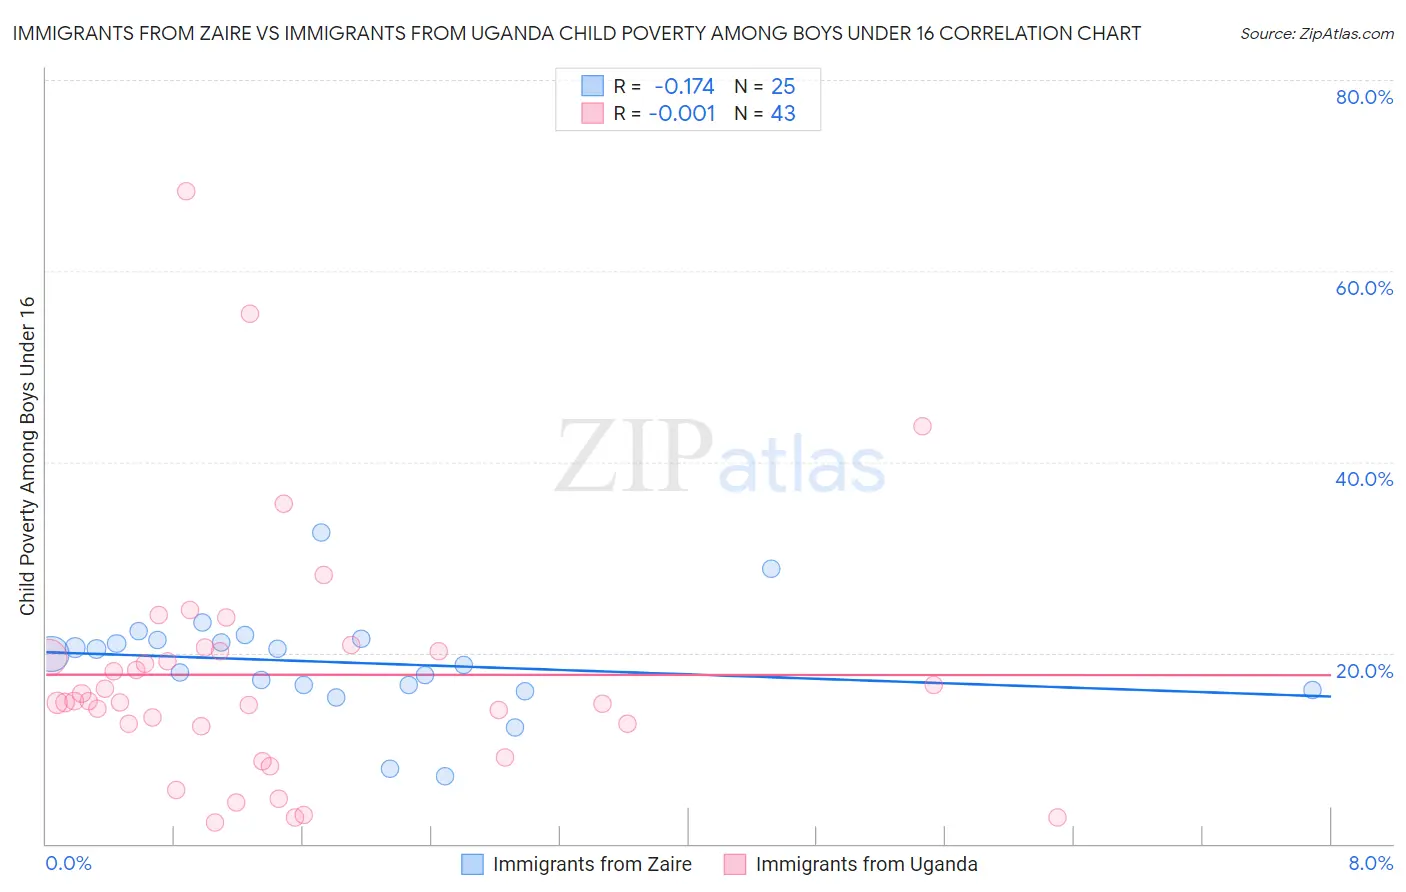 Immigrants from Zaire vs Immigrants from Uganda Child Poverty Among Boys Under 16